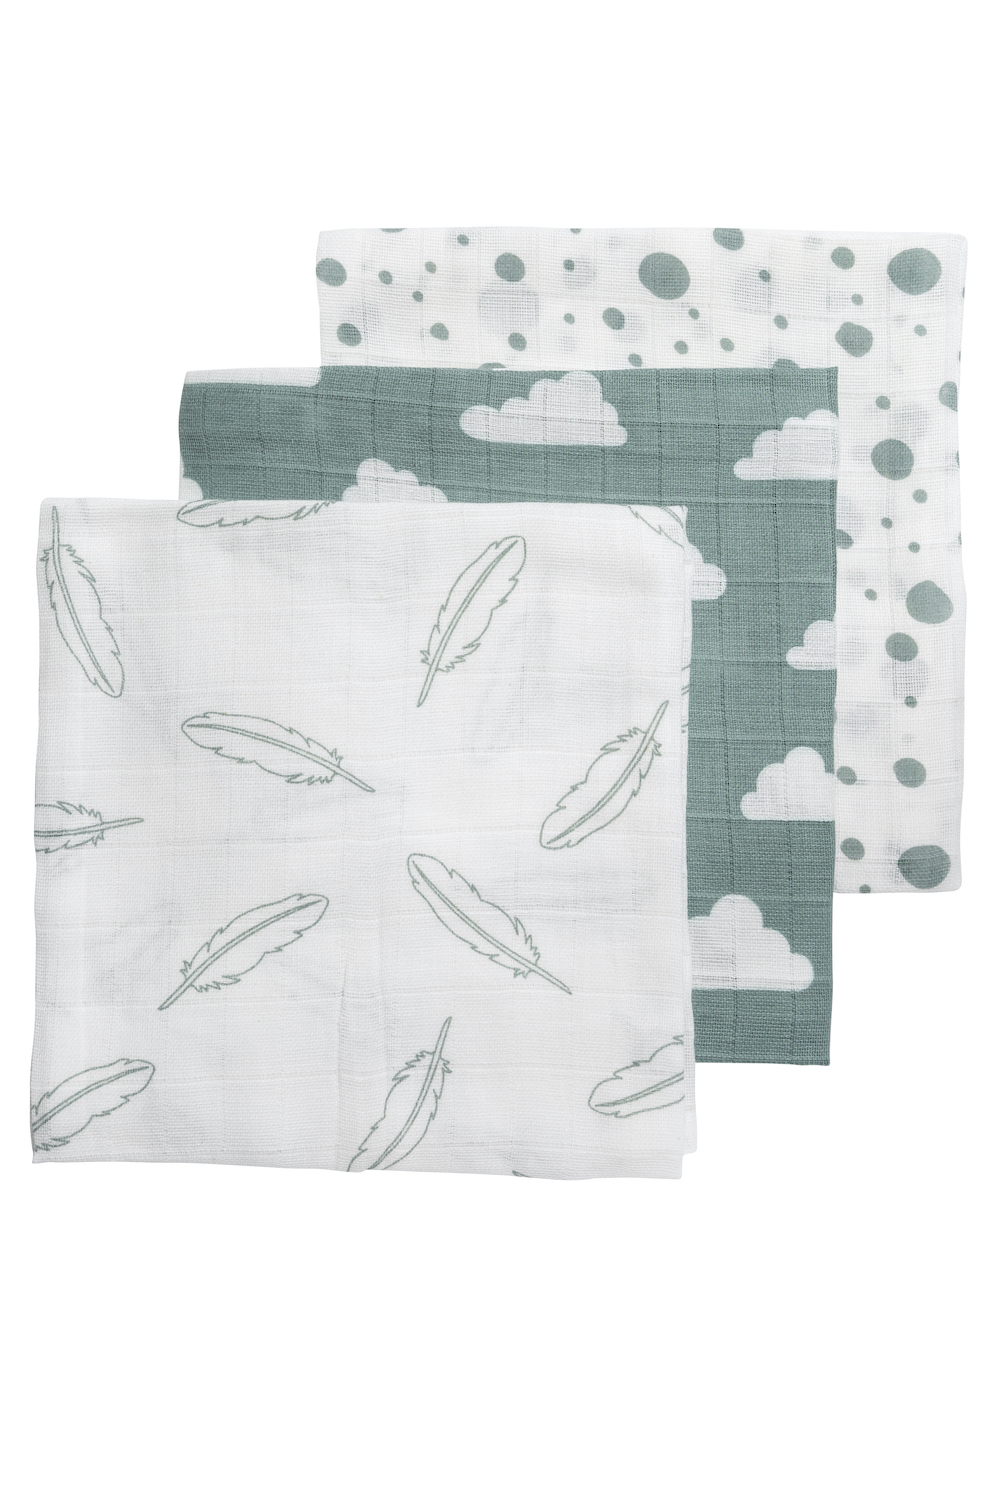 Musselin Mullwindeln 3er pack Clouds/Dots/Feathers - stone green - 70x70cm